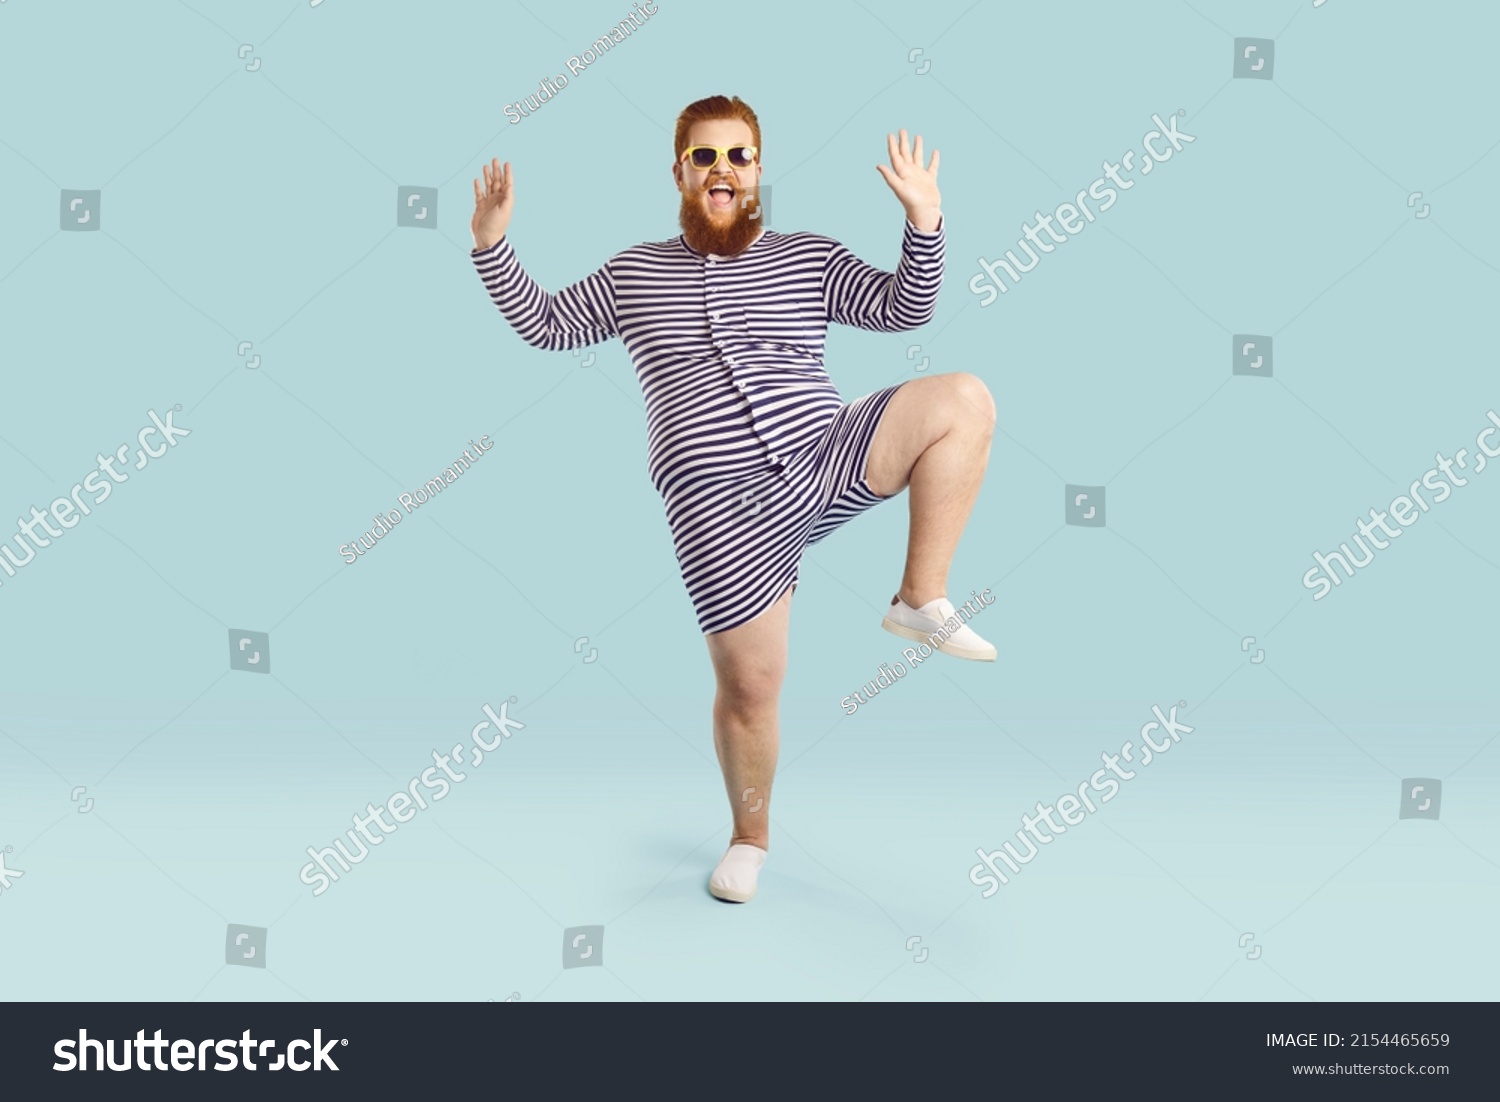 Funny fat guy enjoying his happy summer holiday. Full body length portrait of cheerful goofy chubby bearded man wearing striped retro swimsuit and sunglasses dancing against blue studio background #2154465659